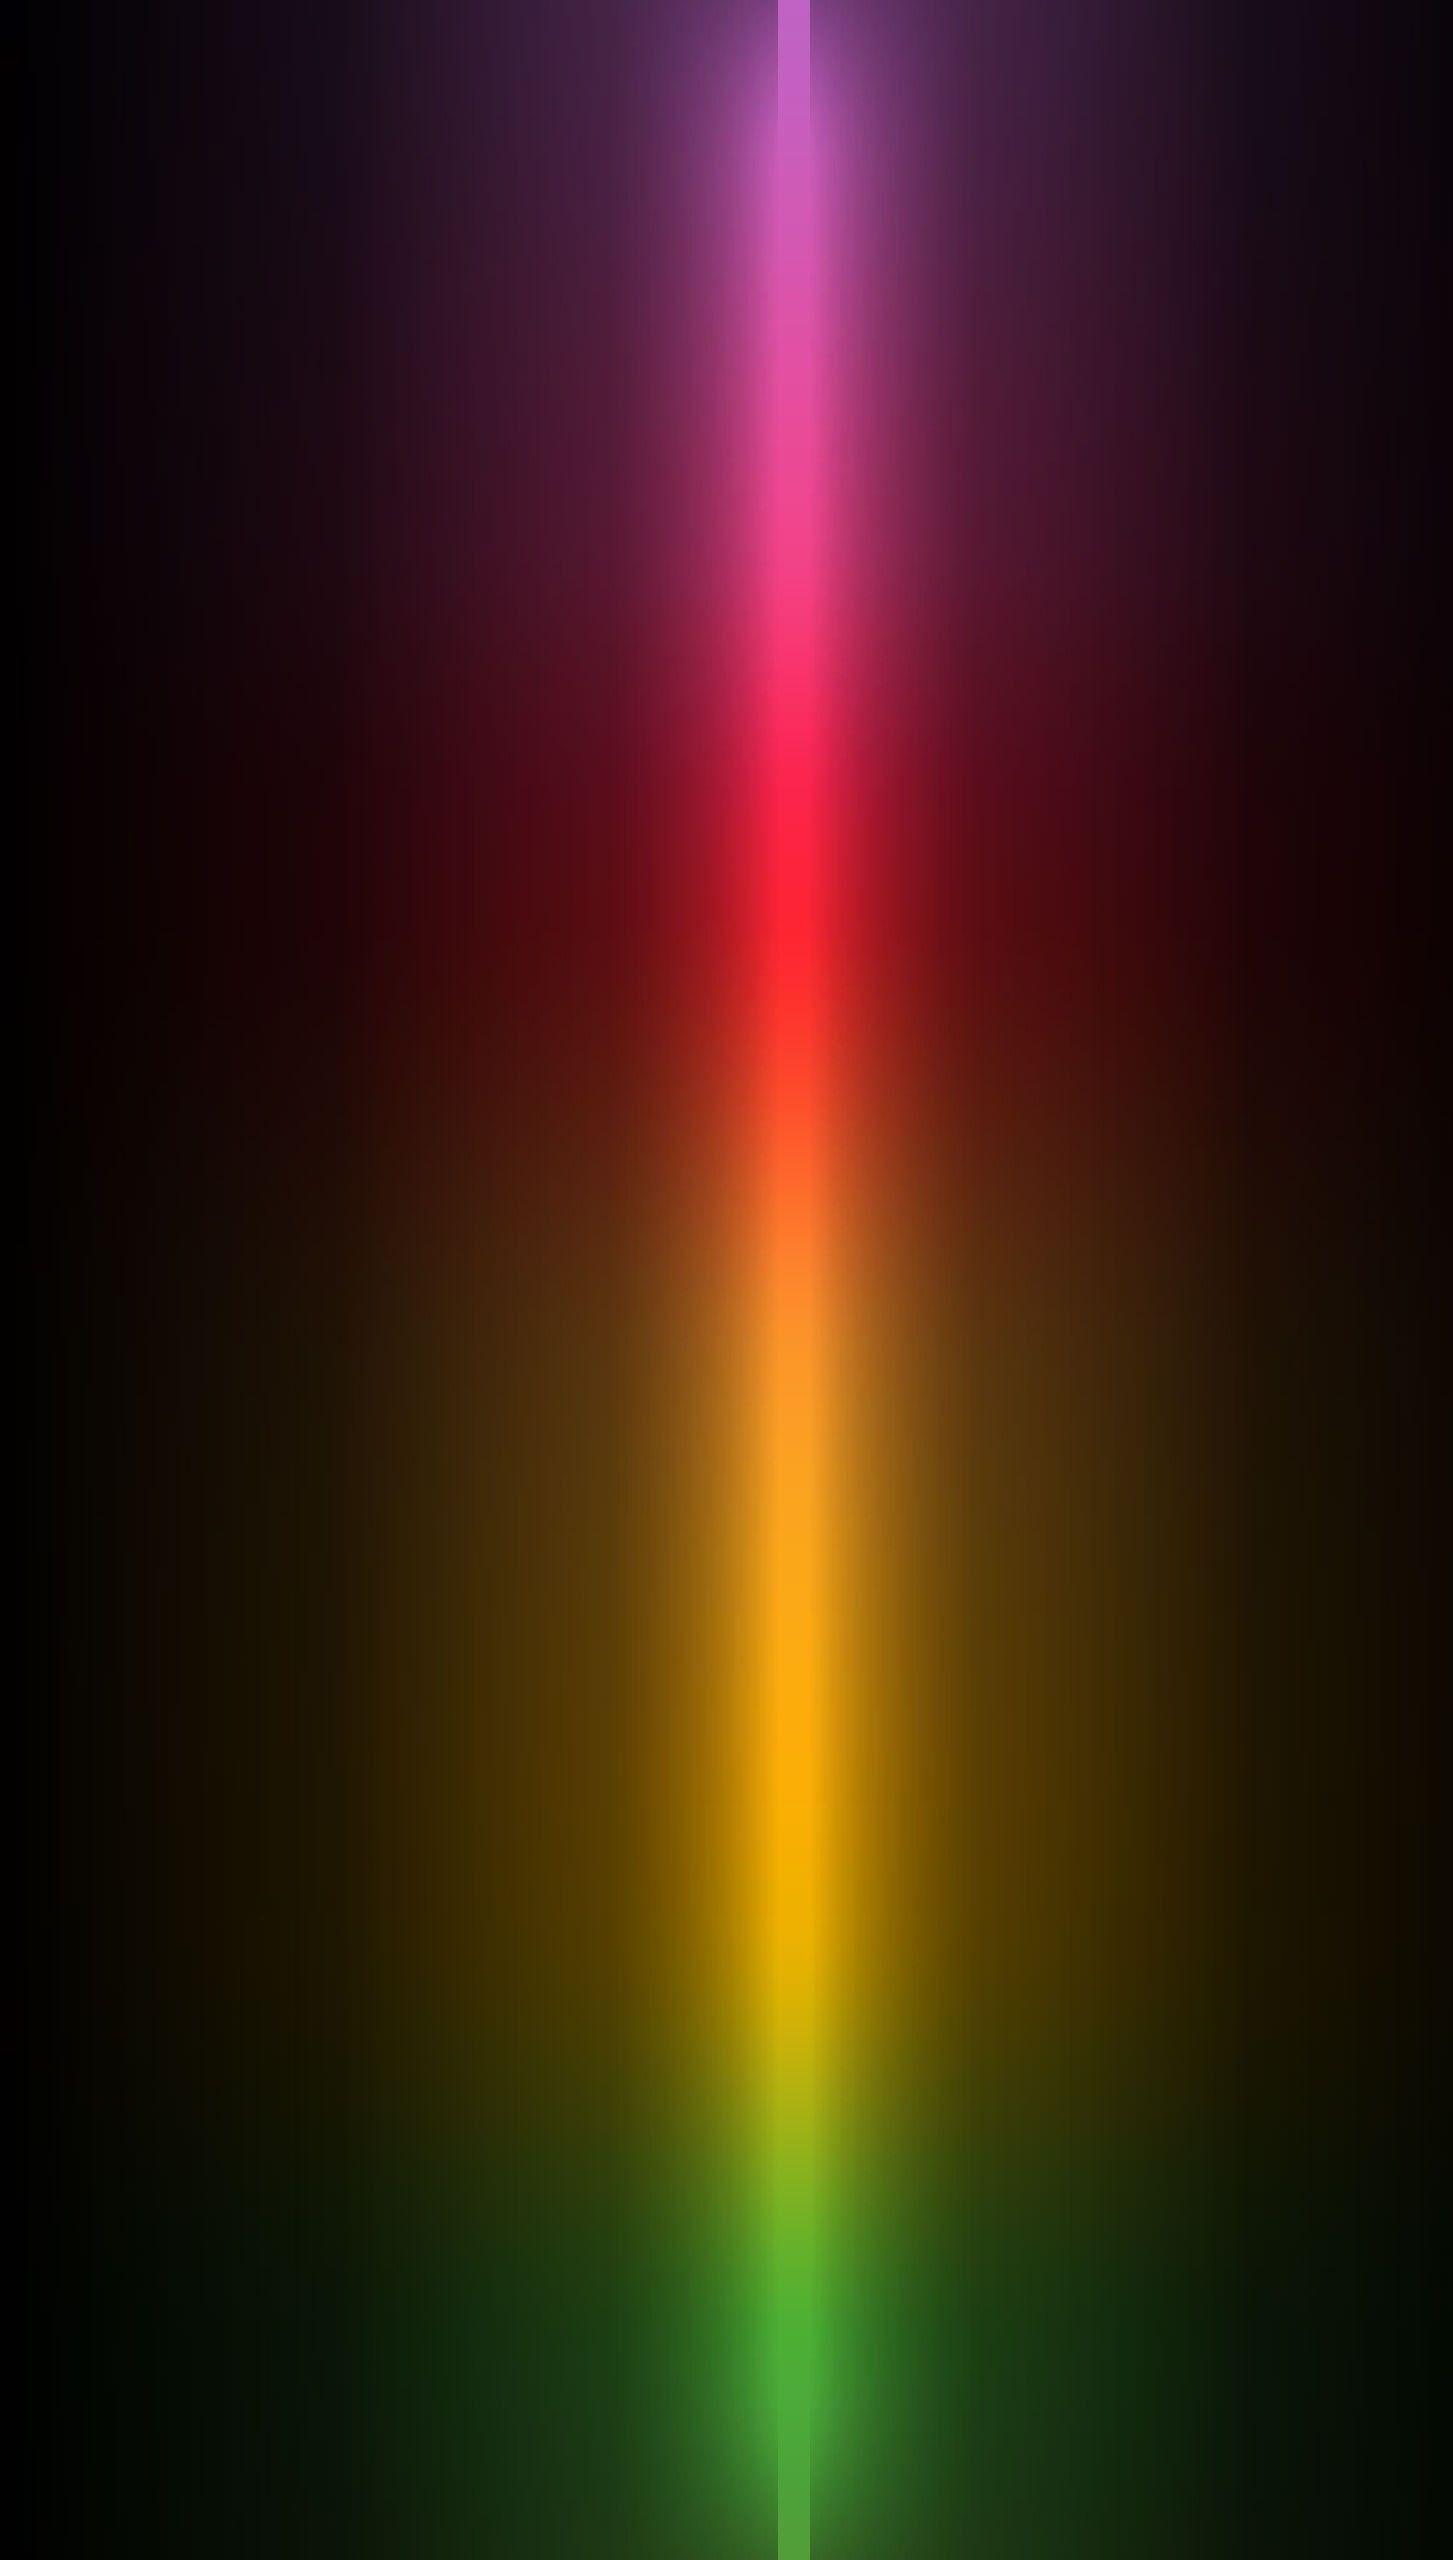 Rainbow Gradient Abstract Wallpaper. *Abstract and Geometric